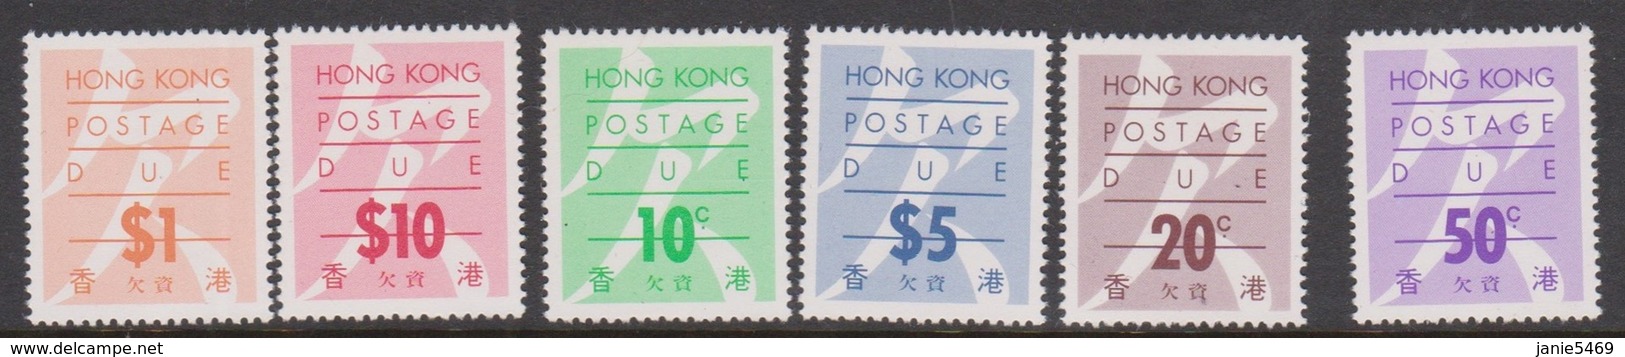 Hong Kong Scott J23-28 1986 Postage Dues, Mint Never Hinged - Unused Stamps